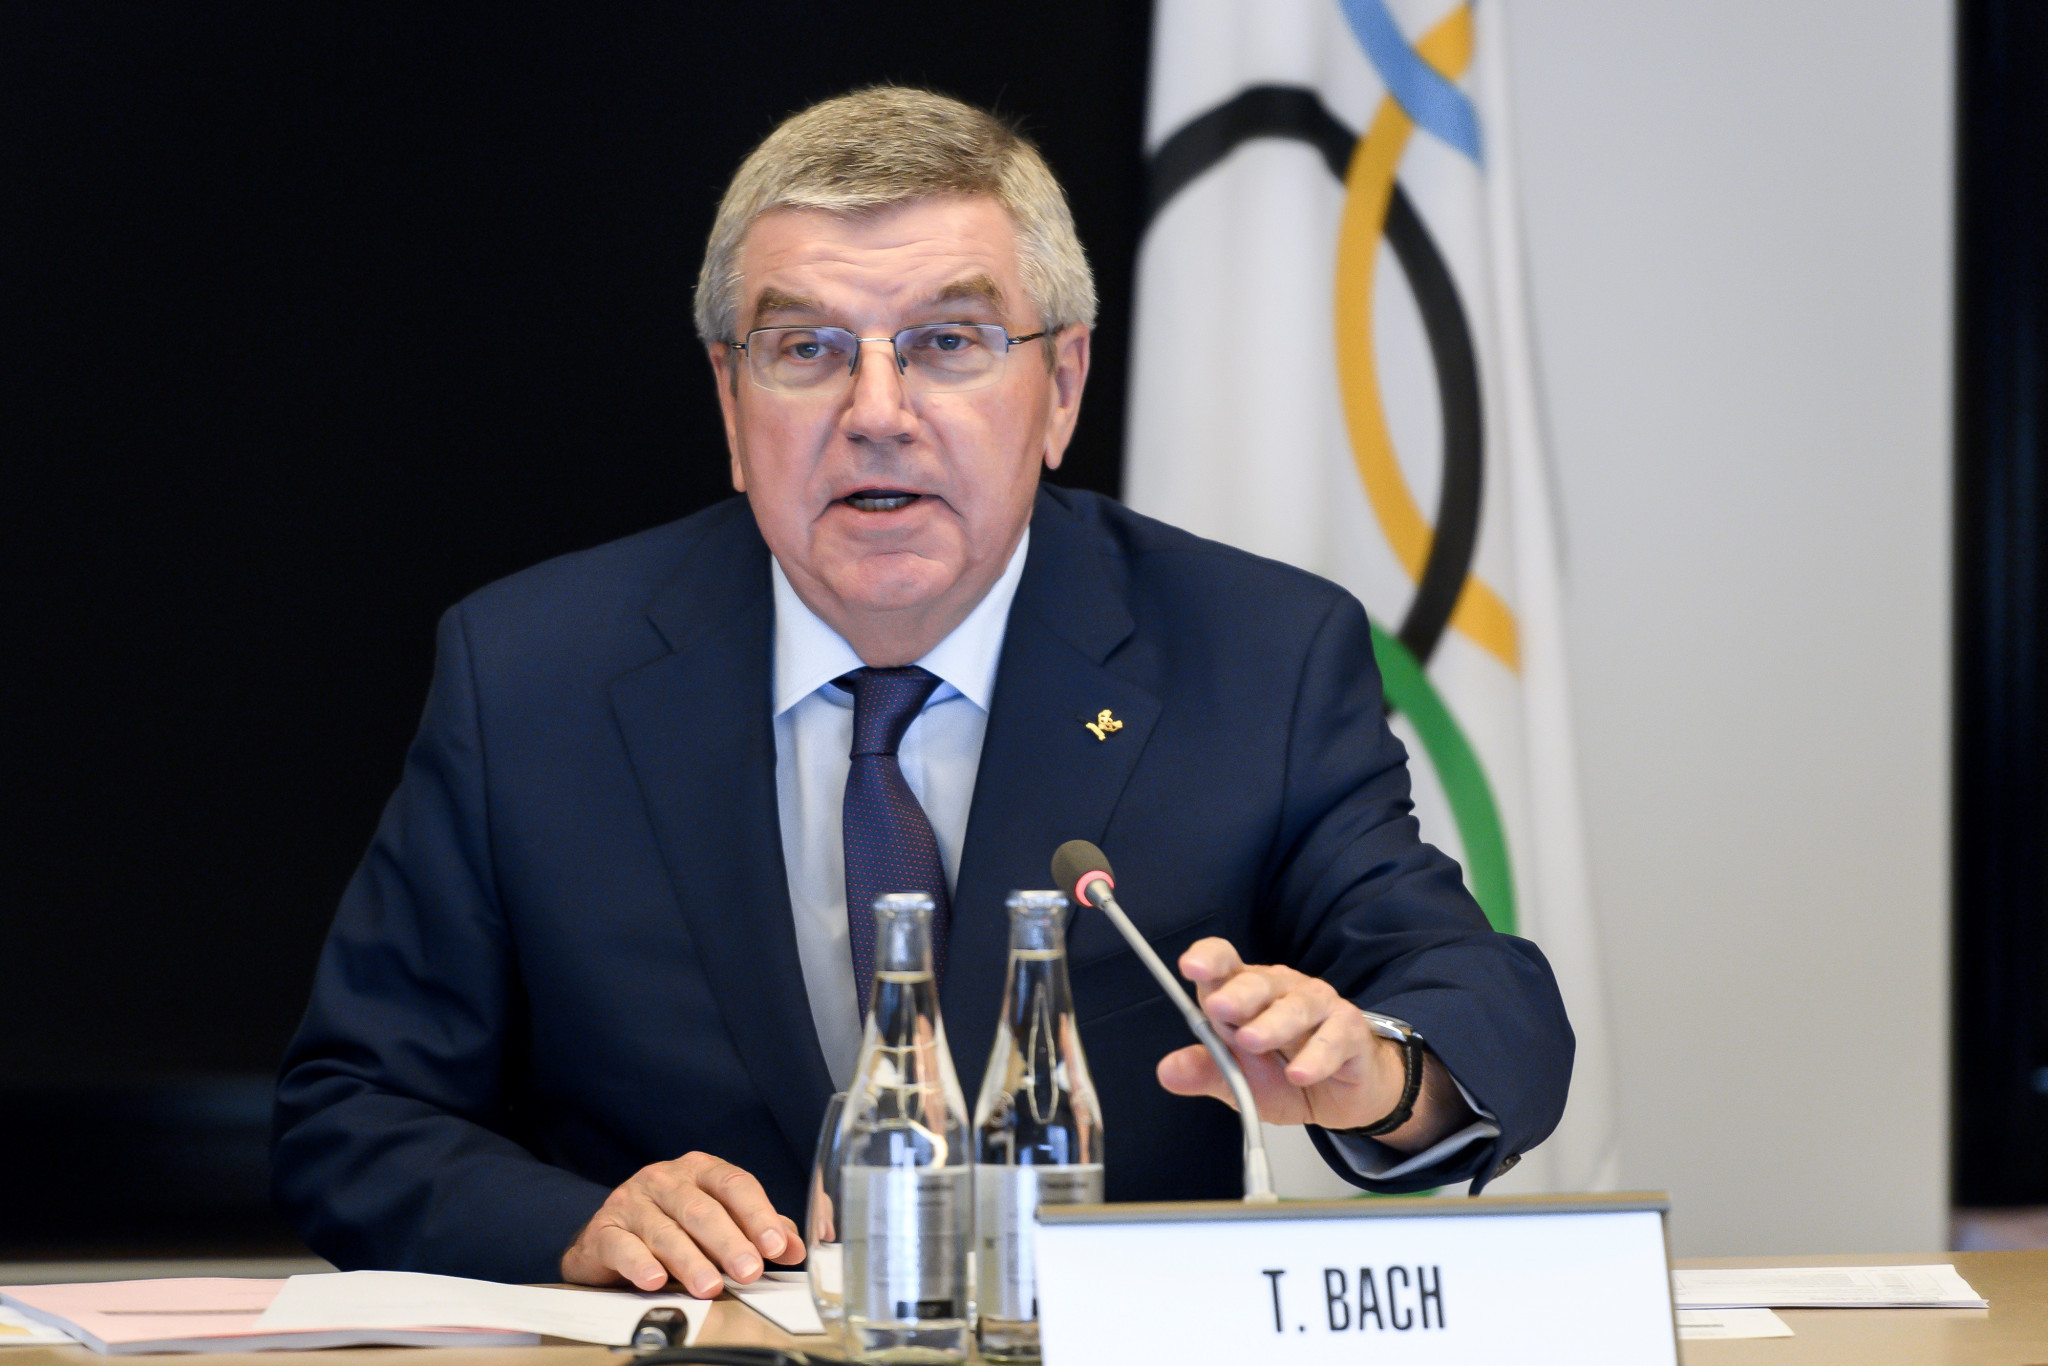 Olympic bids to be widened beyond one host city and flexible timeline installed under proposals from IOC working group